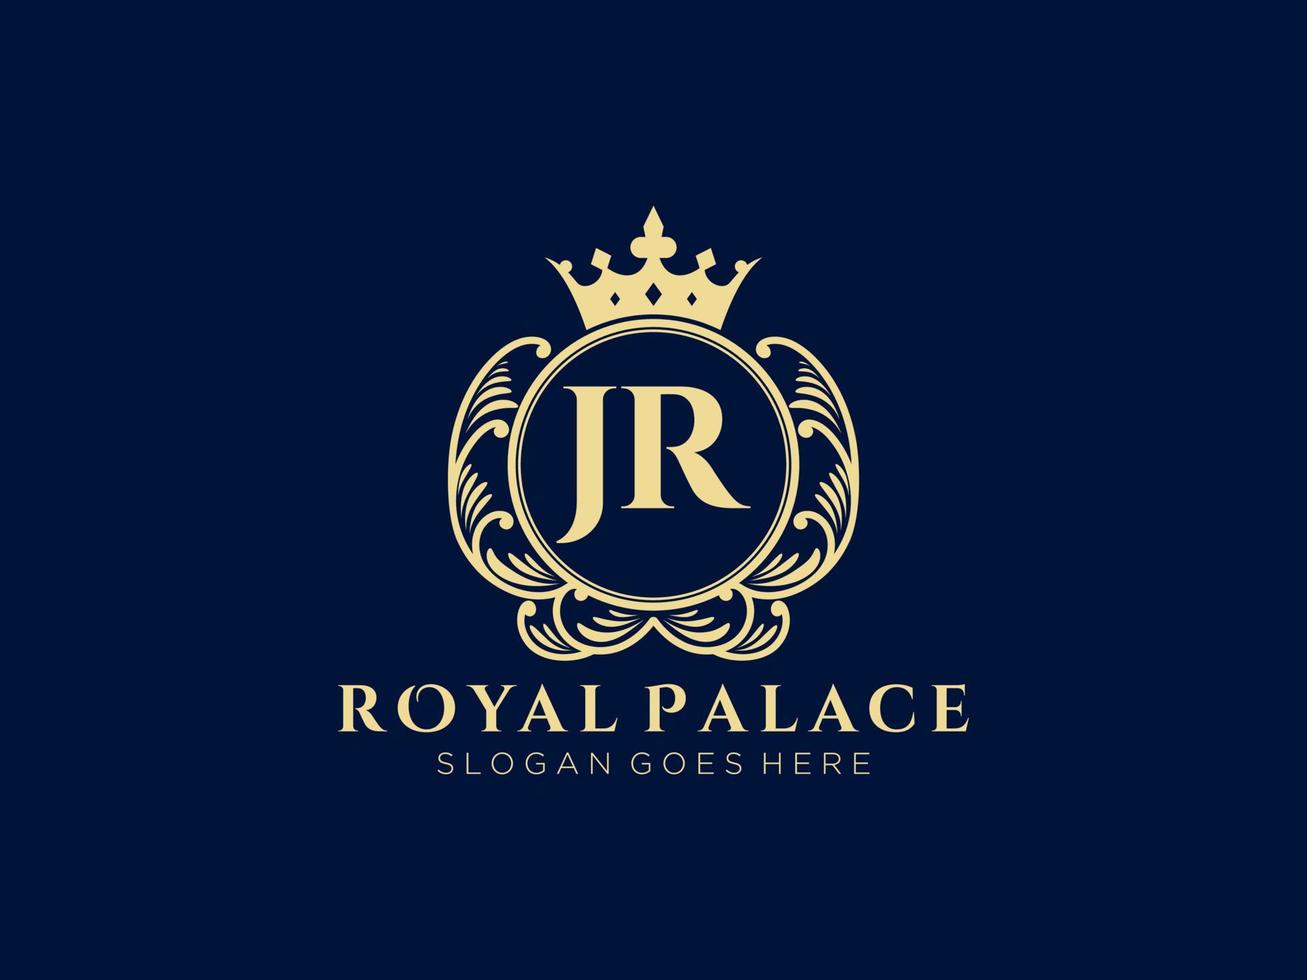 Letter JR Antique royal luxury victorian logo with ornamental frame. vector